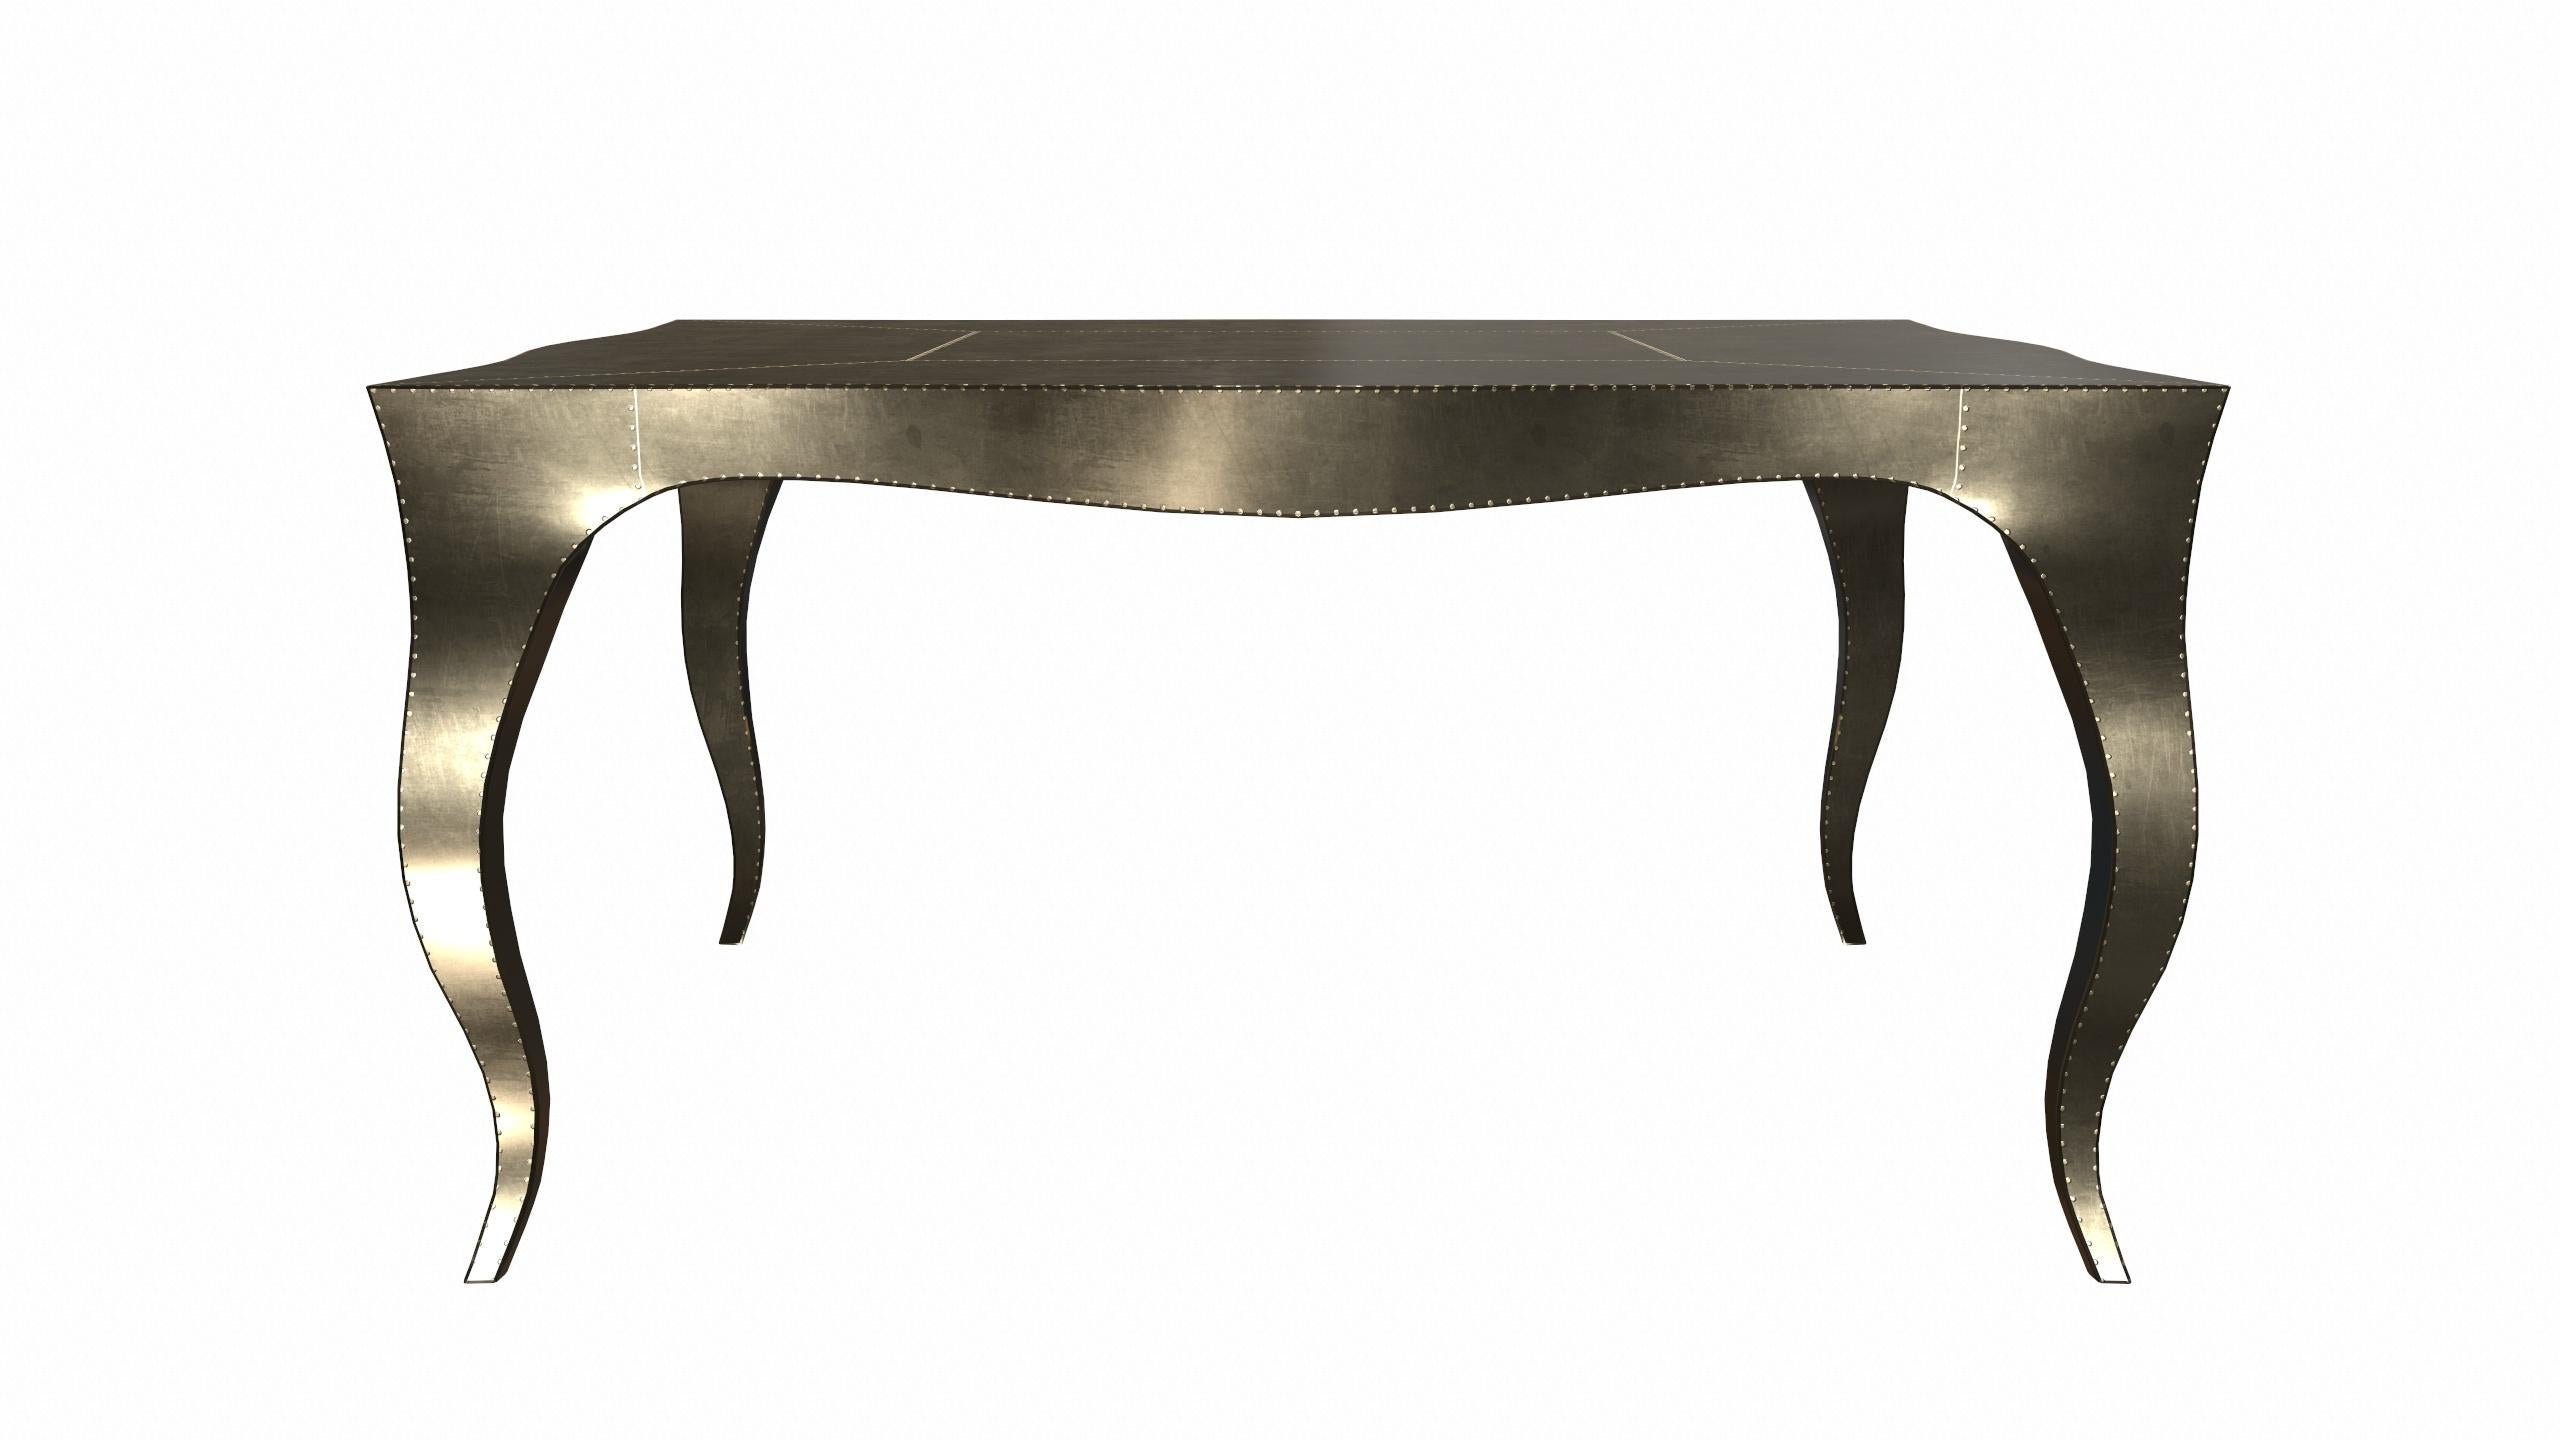 Hand-Carved Louise Art Deco Center Tables Smooth Brass 18.5x18.5x10 inch by Paul Mathieu For Sale